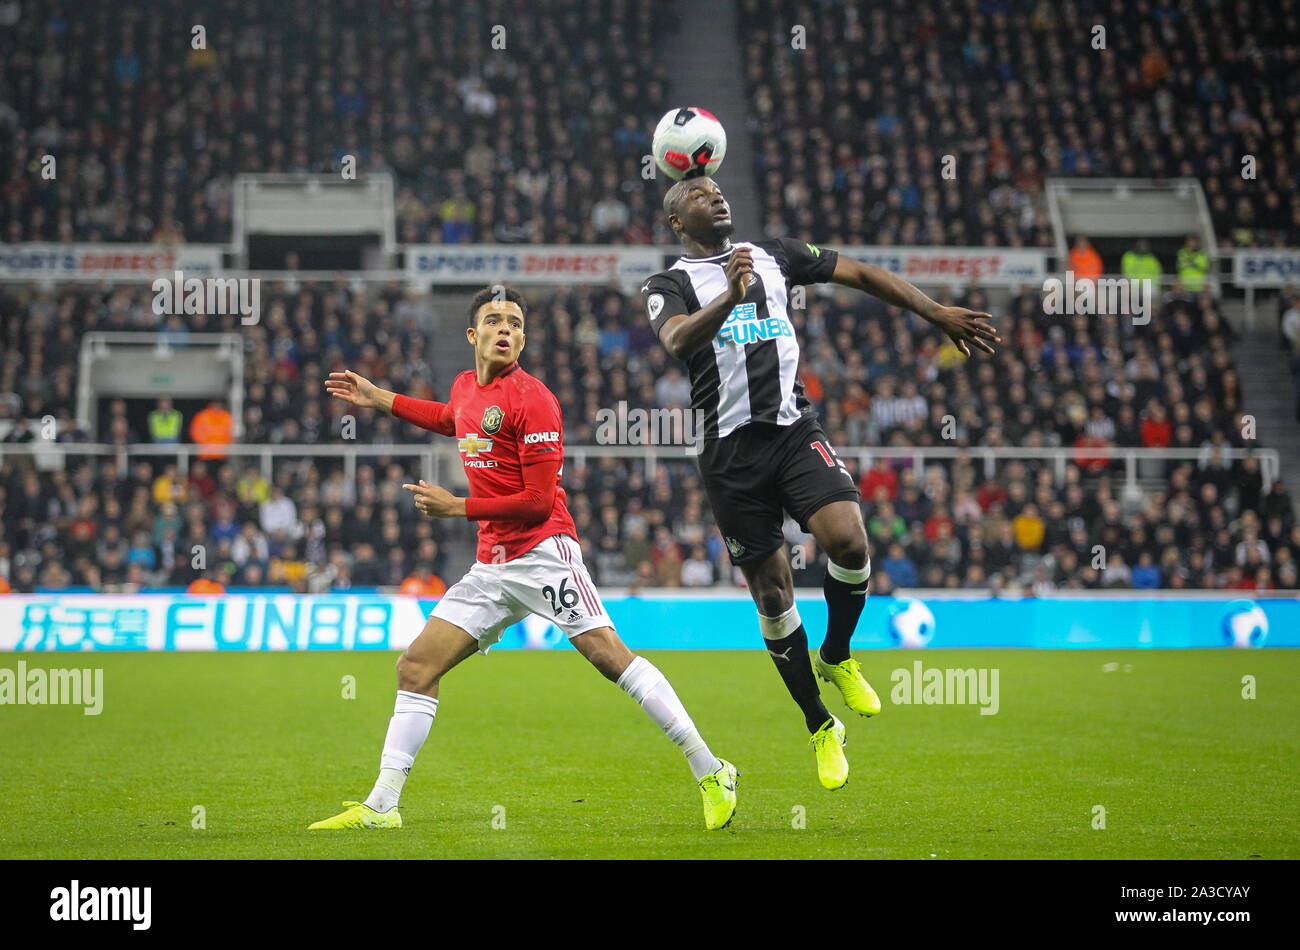 Jetro Willems (on loan from Eintracht Frankfurt) of Newcastle United and Mason Greenwood of Man Utd during the Premier League match between Newcastle United and Manchester United at St. James's Park, Newcastle, England on 6 October 2019. Photo by J GILL / PRiME Media Images. Stock Photo